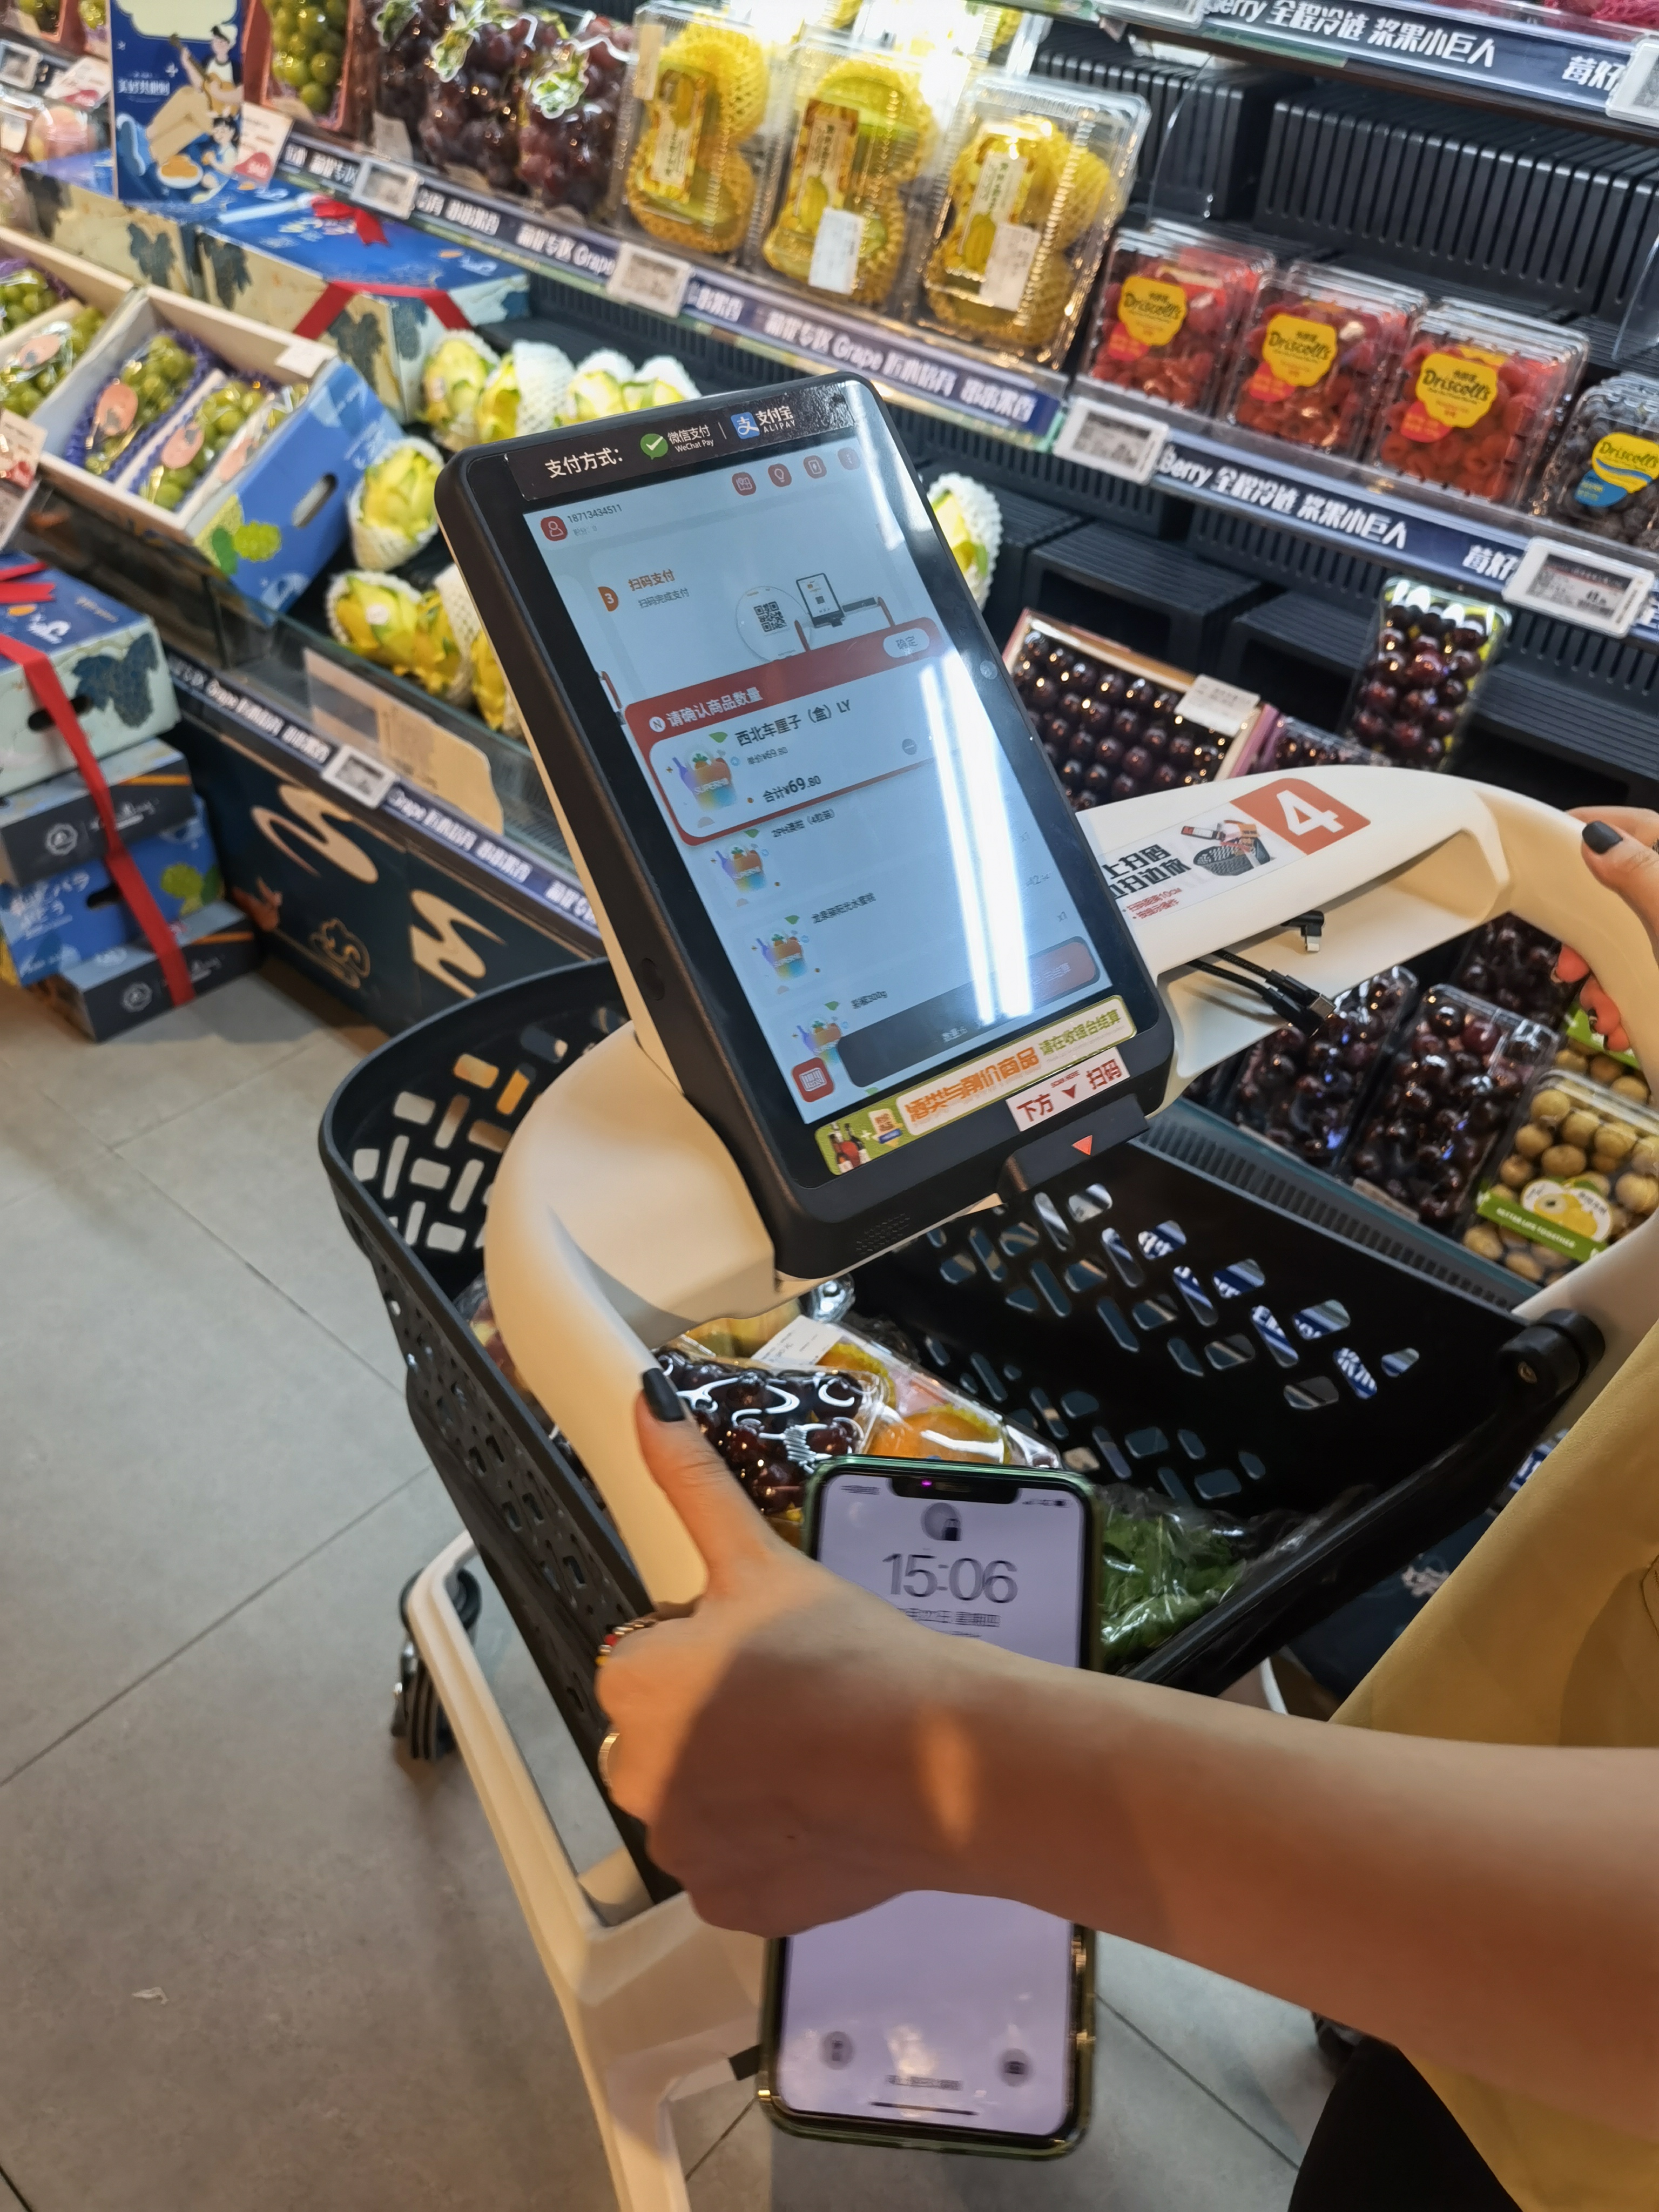 Superhii said that it has built a larger volume of the smart shopping cart 